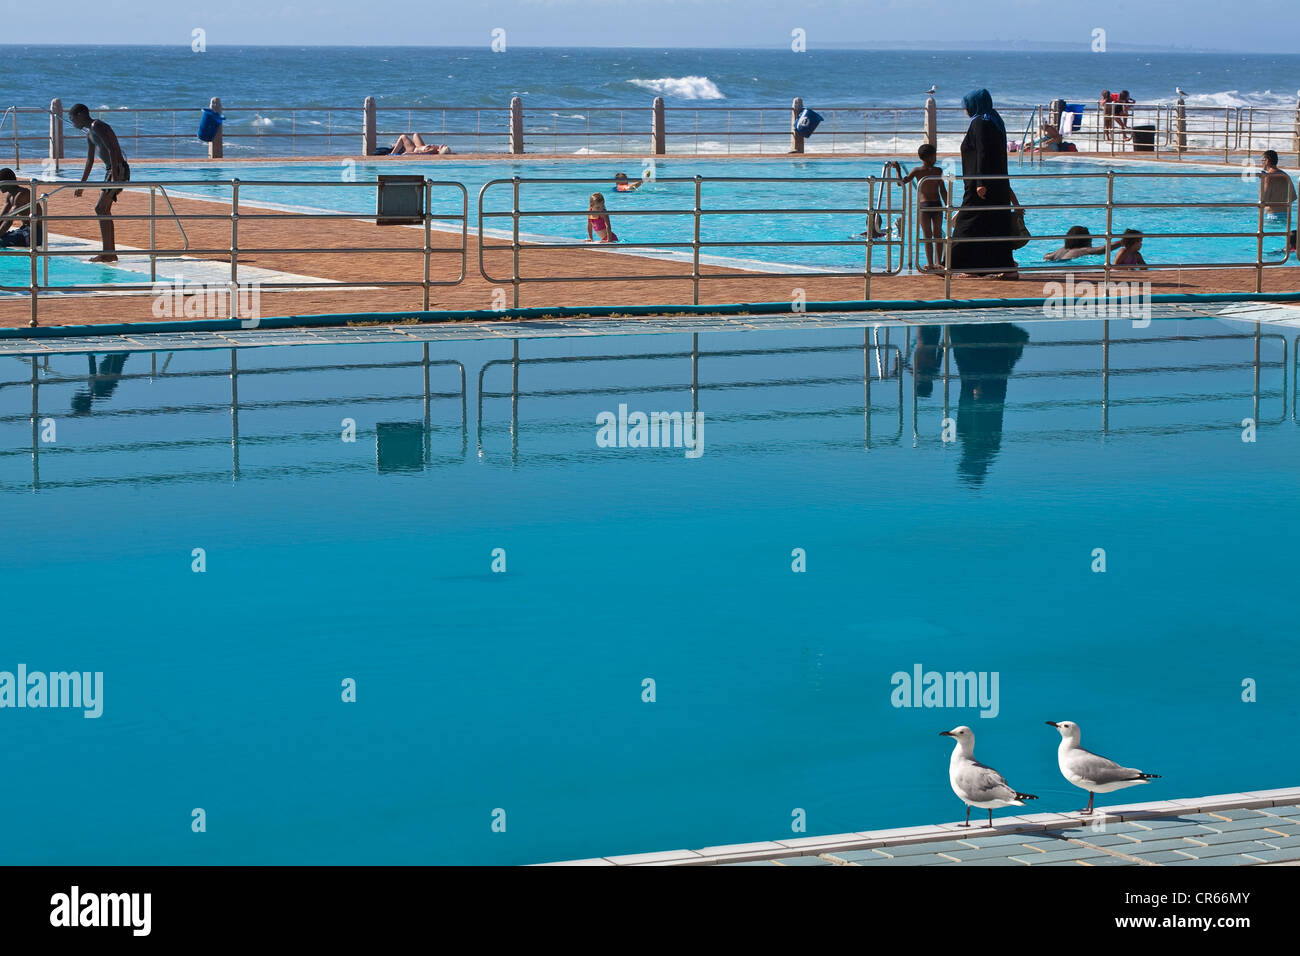 South Africa, Western Cape, Cape Town, Sea Point, outdoor swimming pool on the seaside Stock Photo